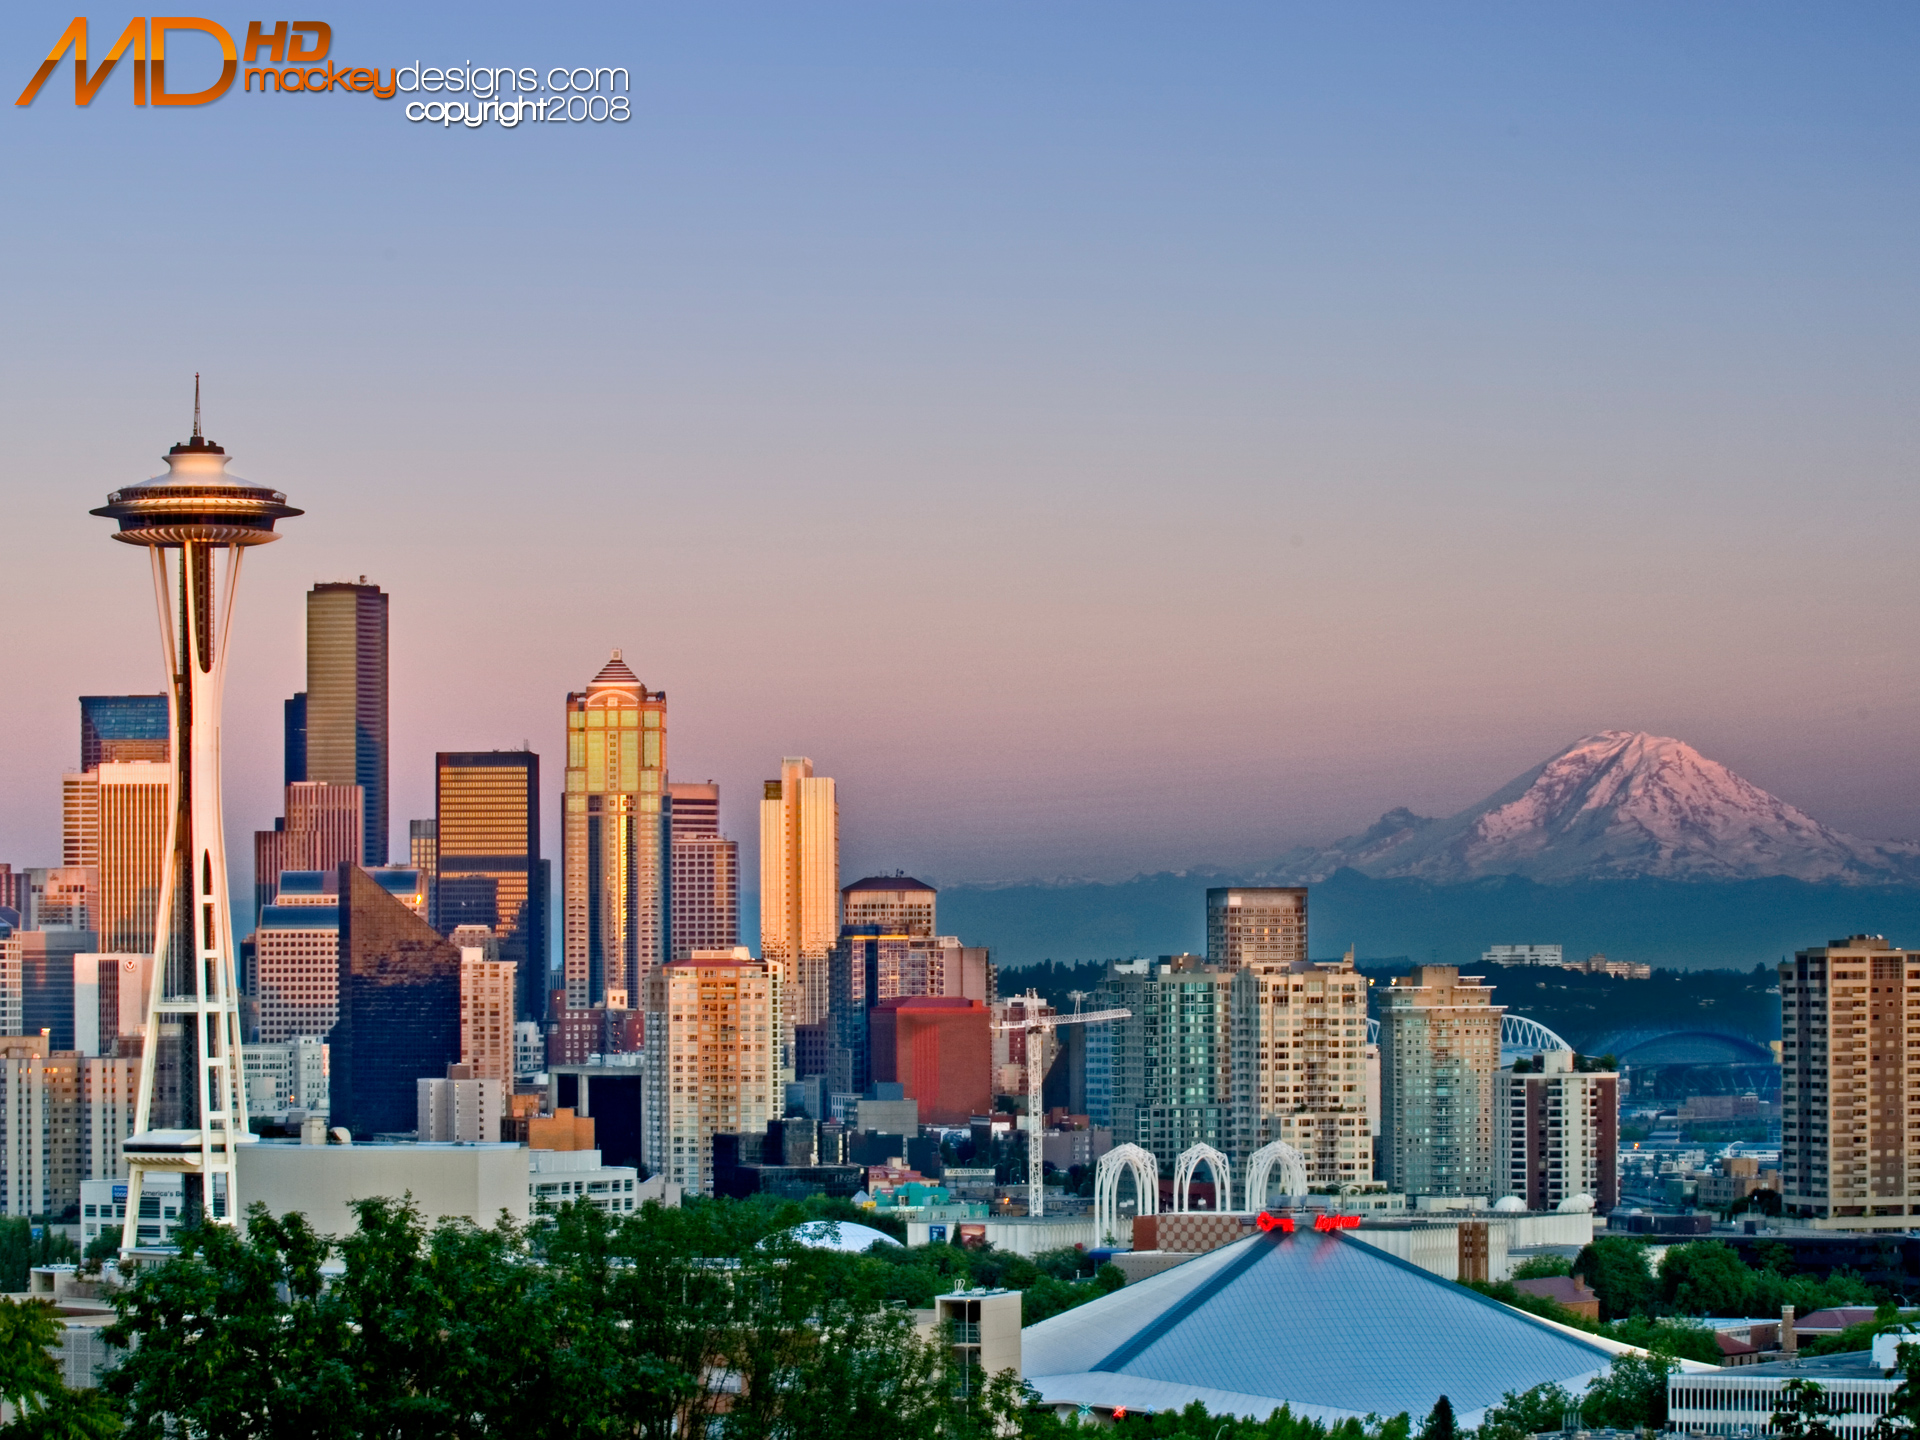 Awesome Seattle wallpaper Cities wallpapers